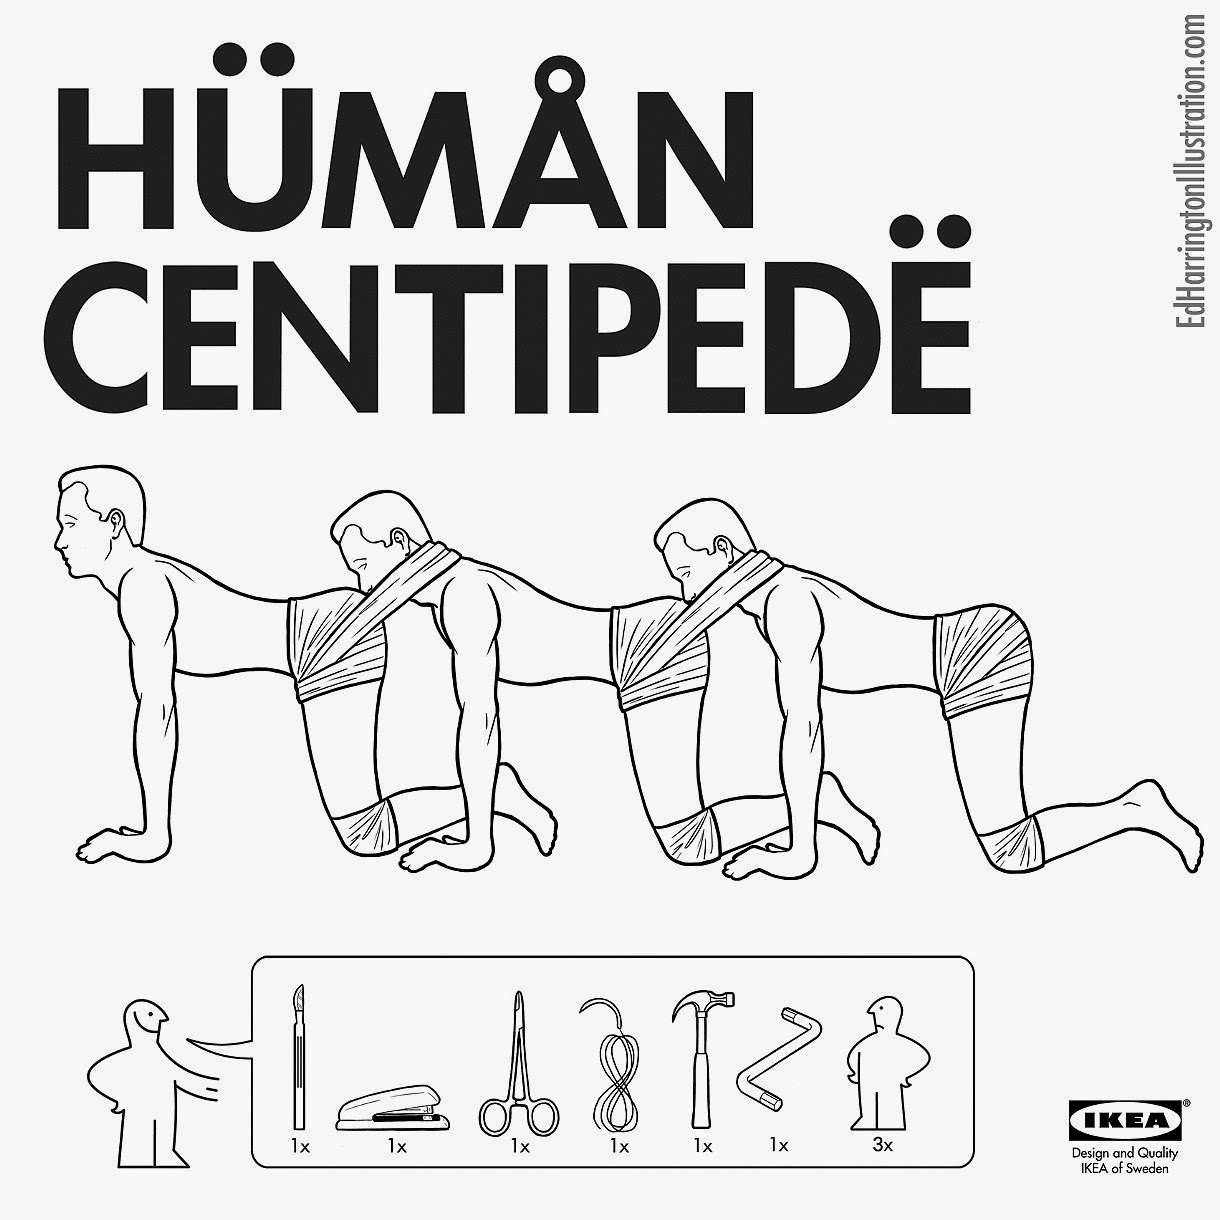 07-The-Human-Centipede-Ed-Harrington-Illustrations-Assemble-Monsters-with-IKEA-Instructions-www-designstack-co